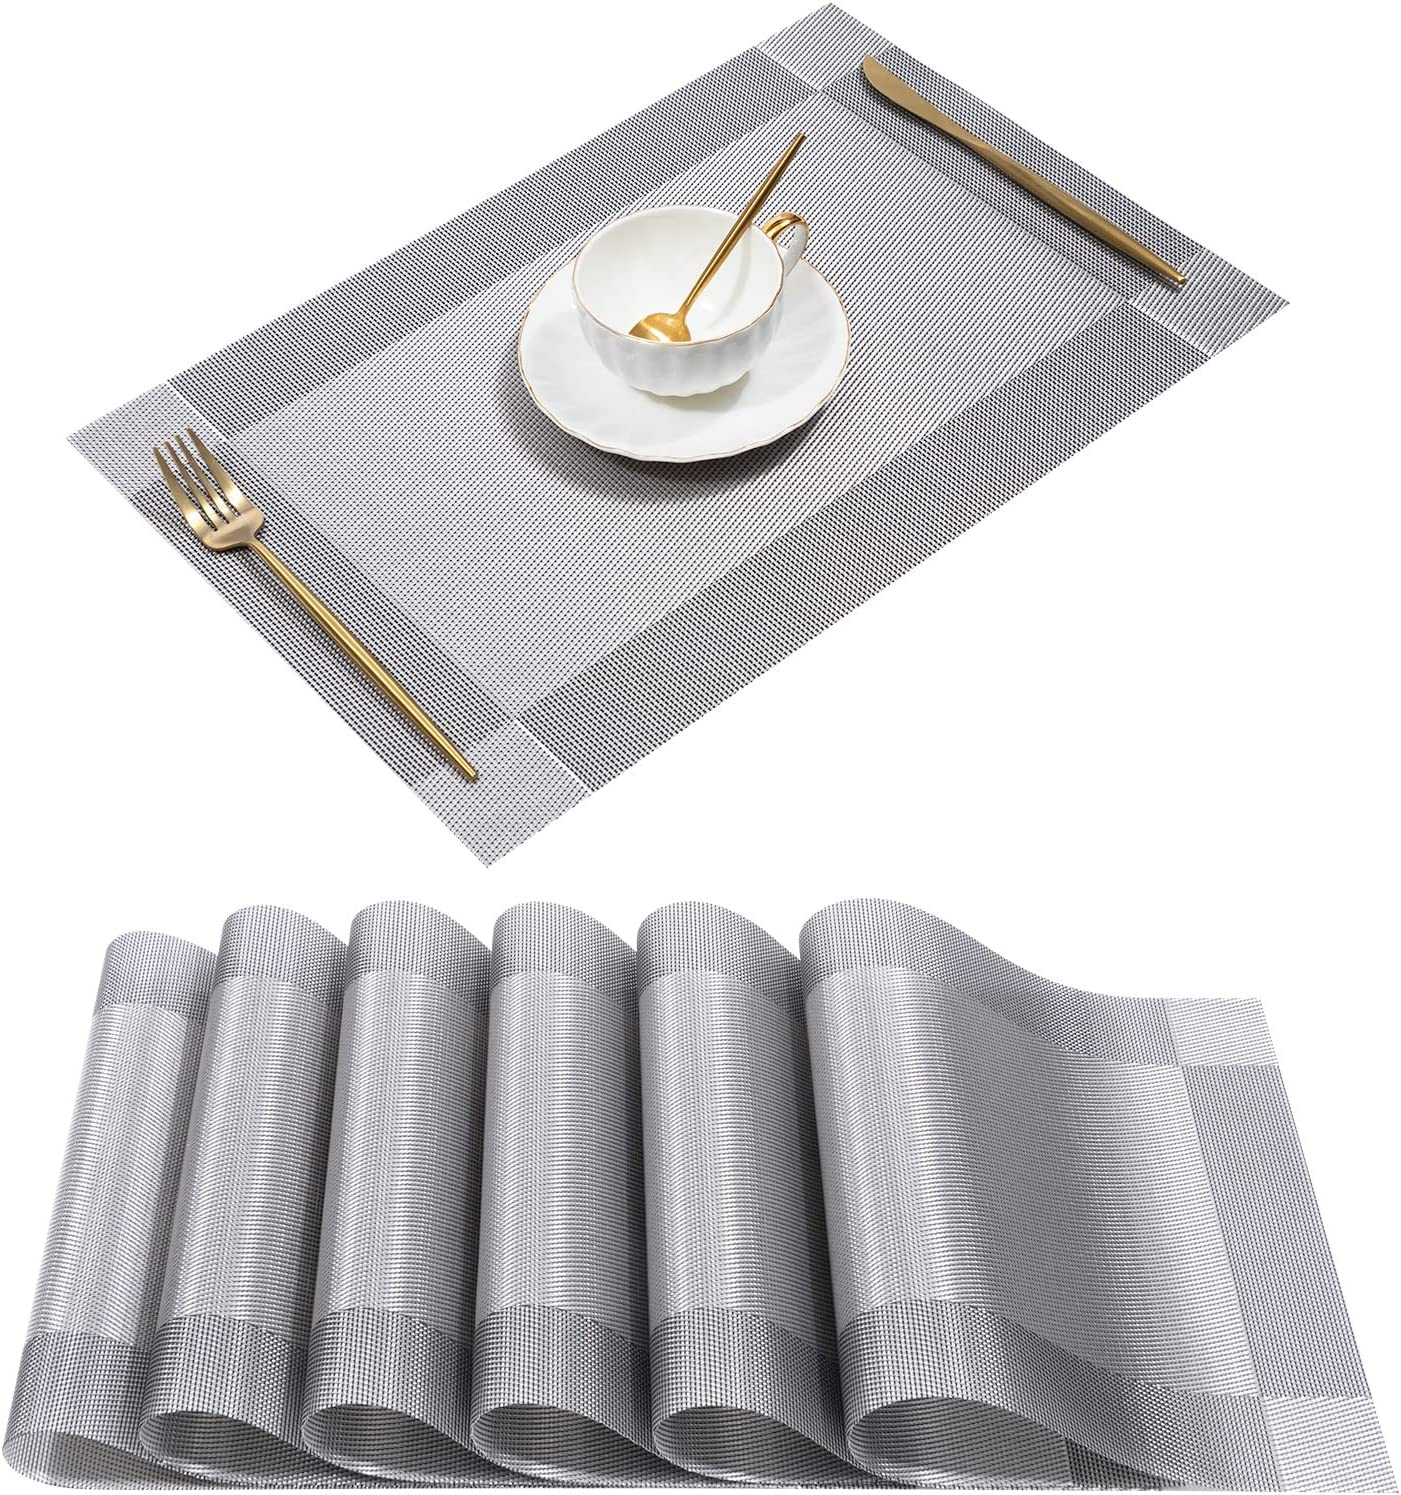 How Stylish Placemats Can Transform Your Space